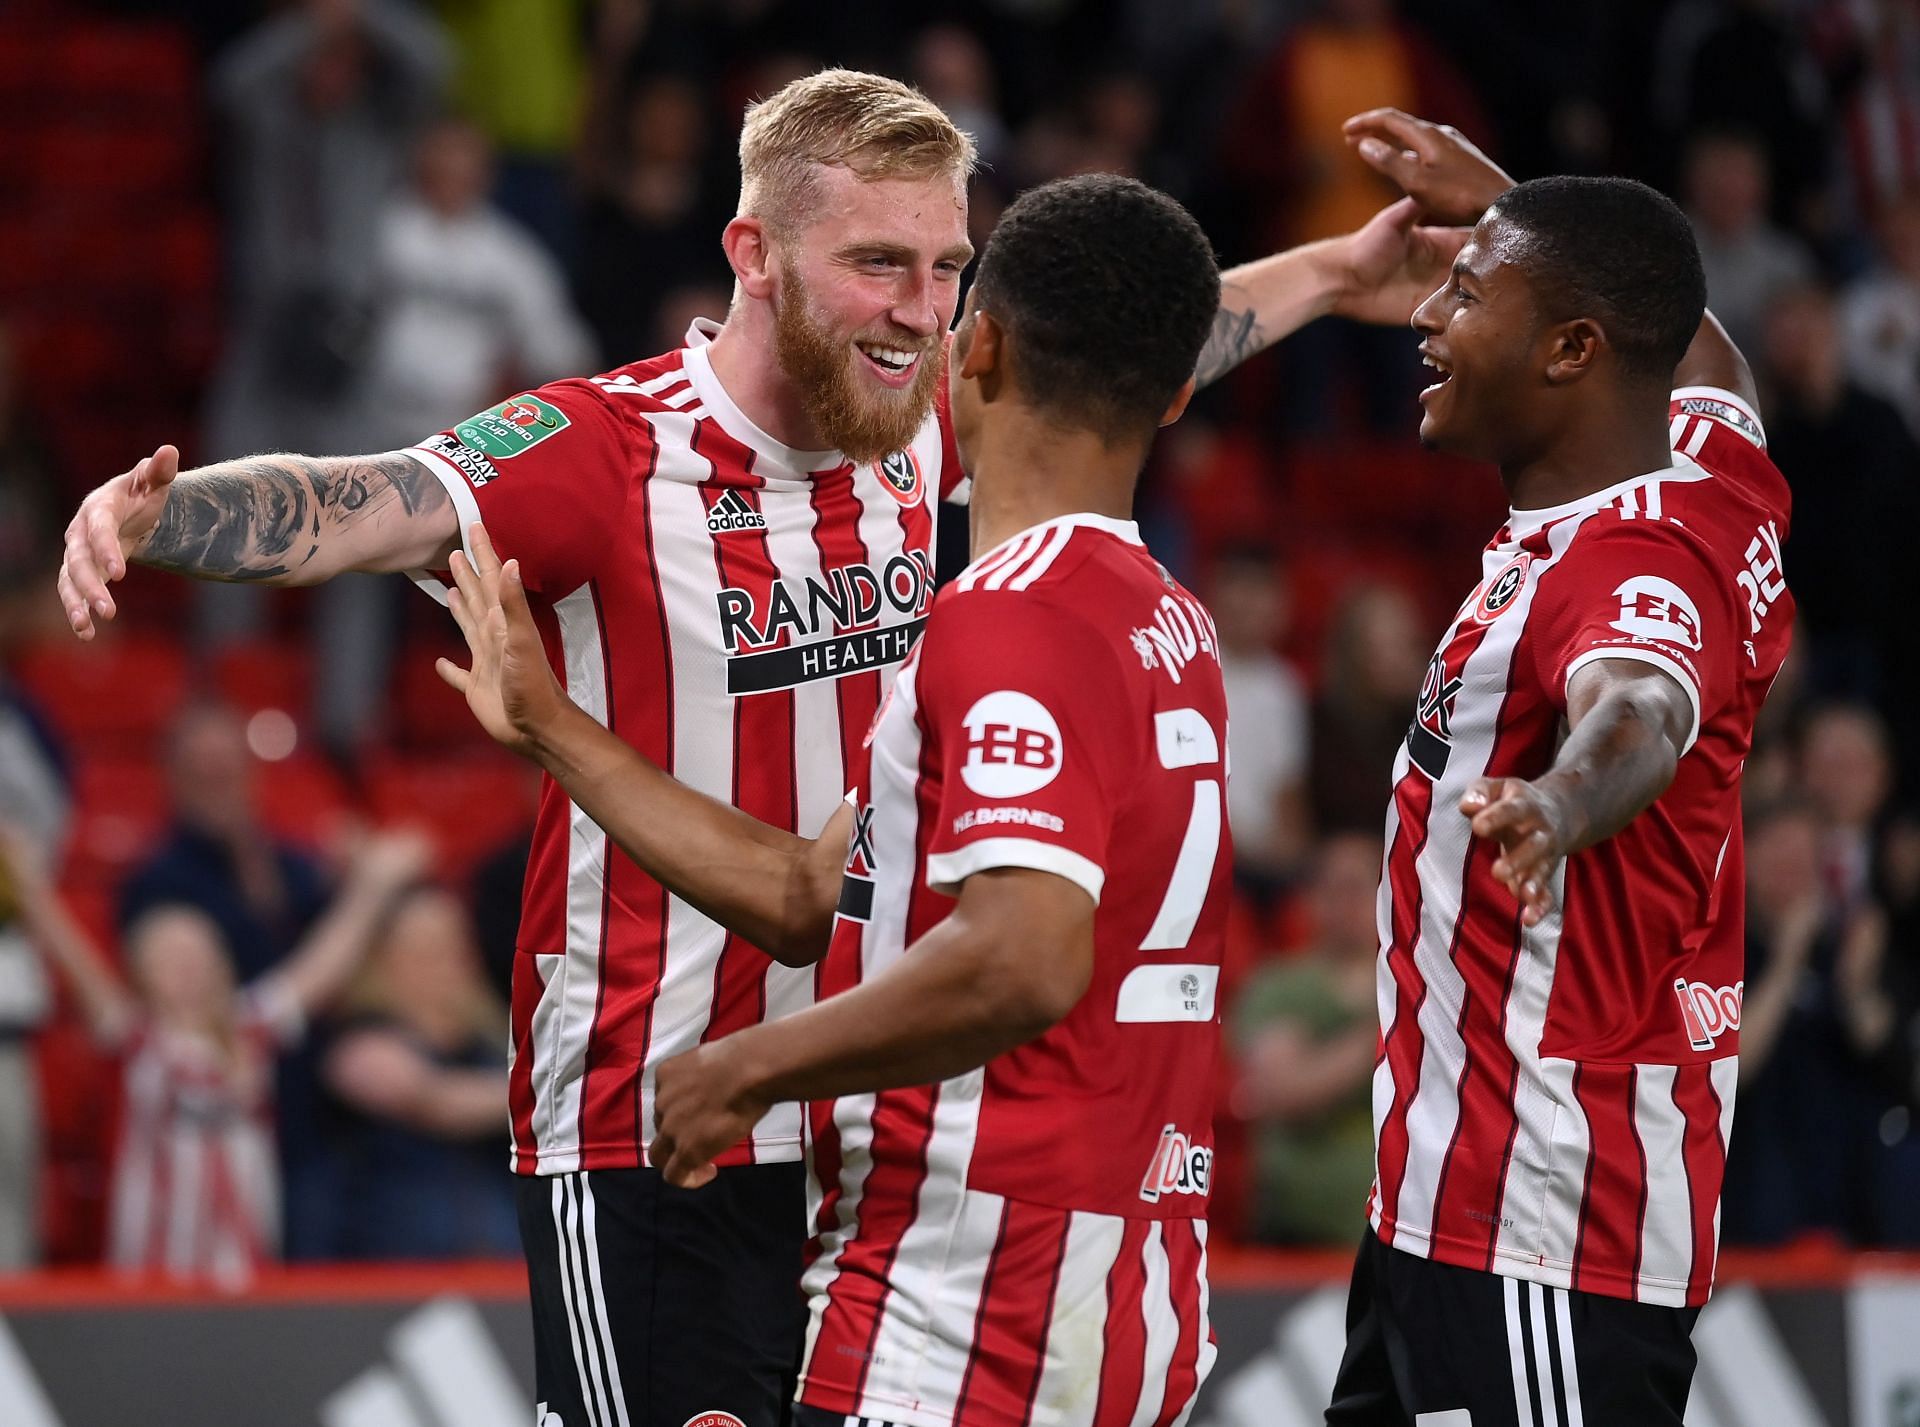 Sheffield United will host Millwall on Tuesday